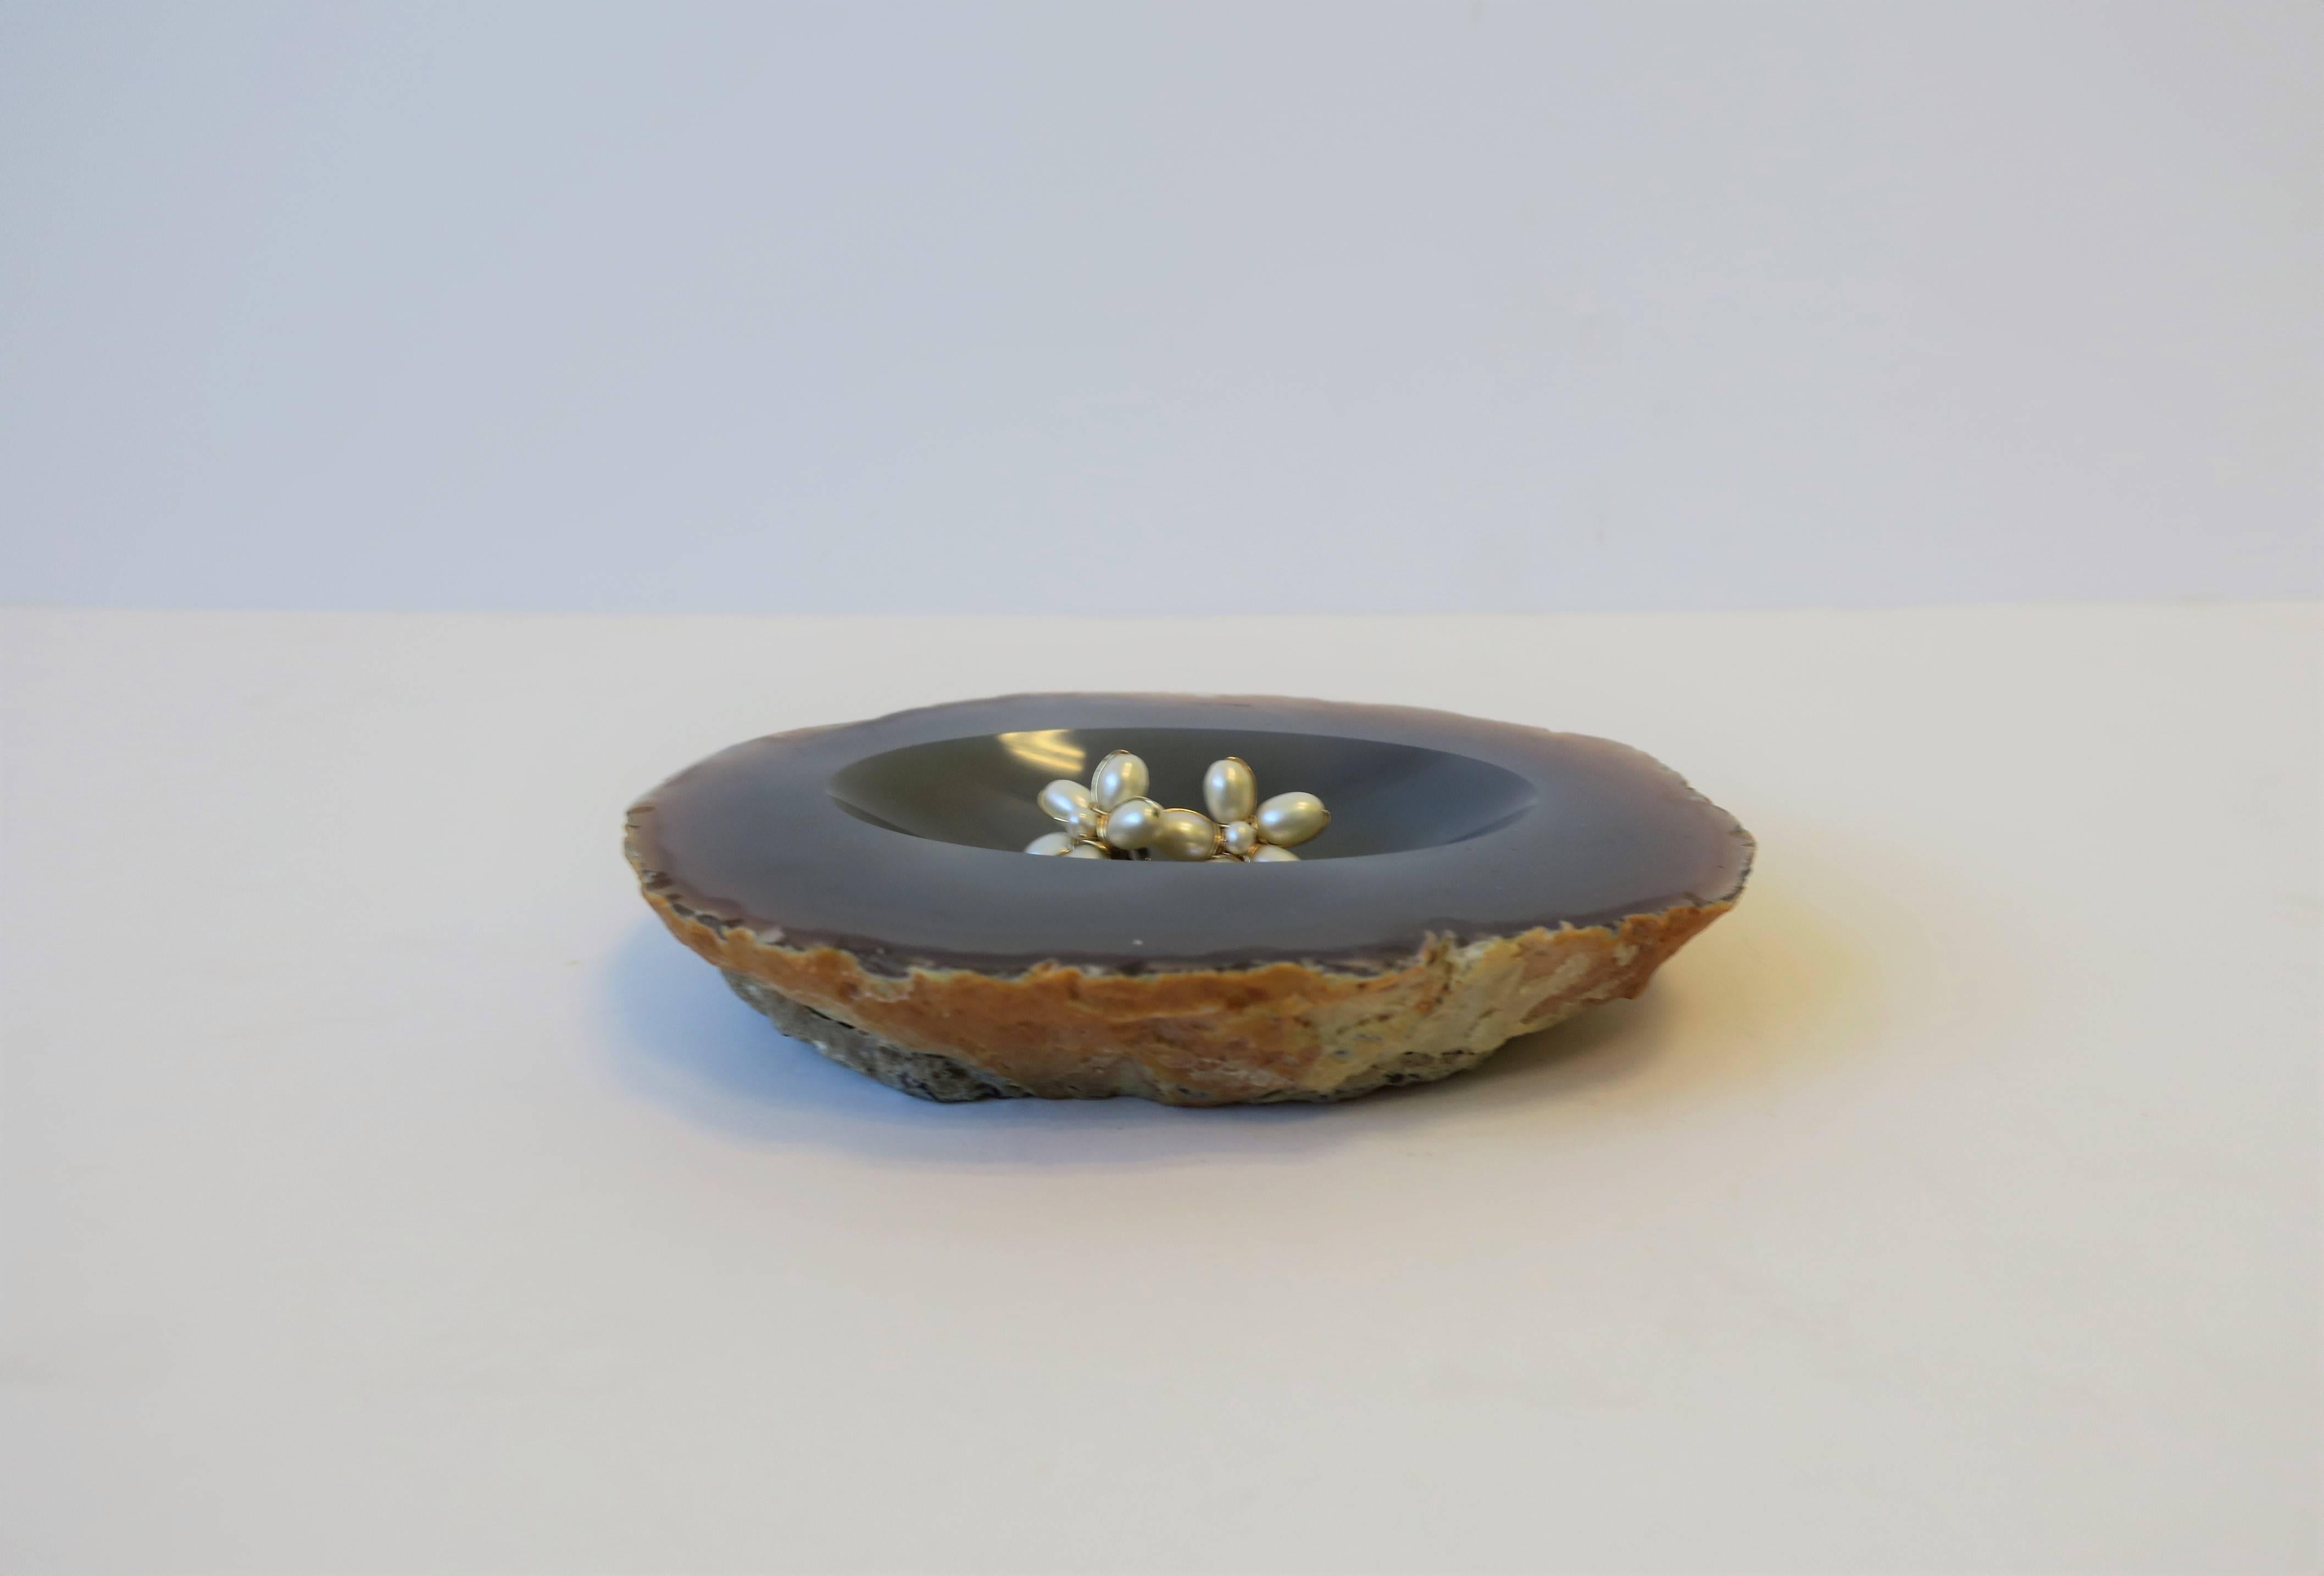 Agate Onyx Jewelry Dish Organic Modern in Blue Grey In Good Condition For Sale In New York, NY